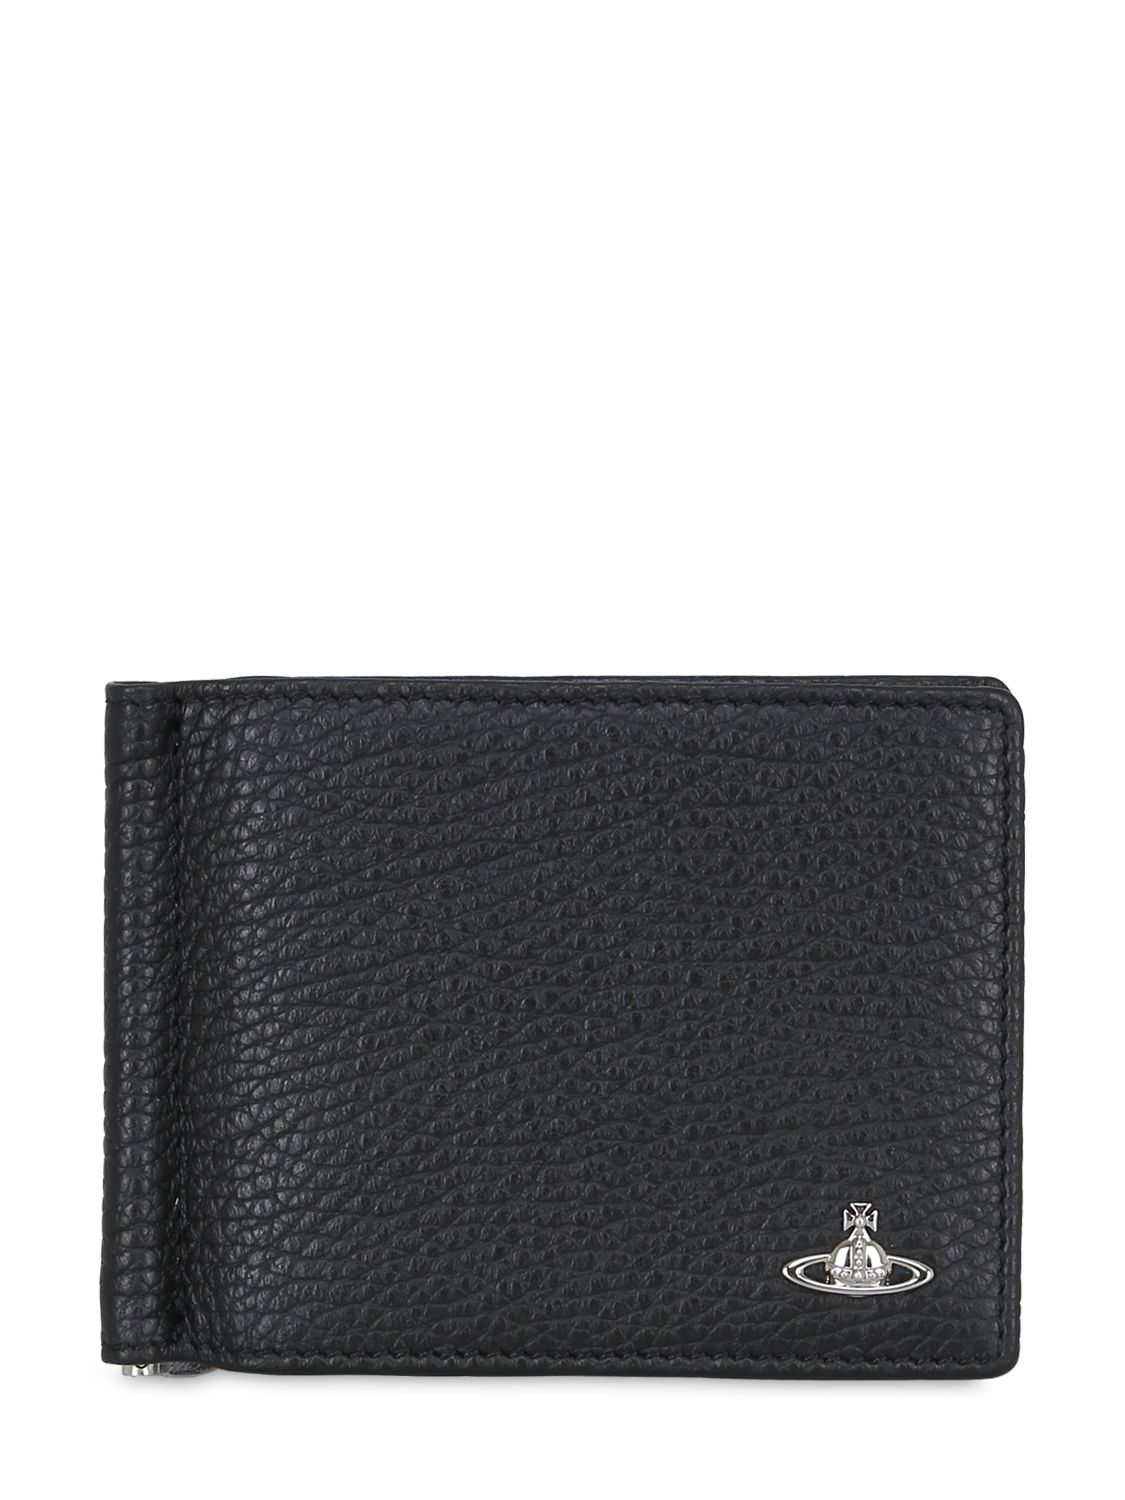 Lyst - Vivienne Westwood Milano Leather 33355 Billfold Wallet With Coin ...